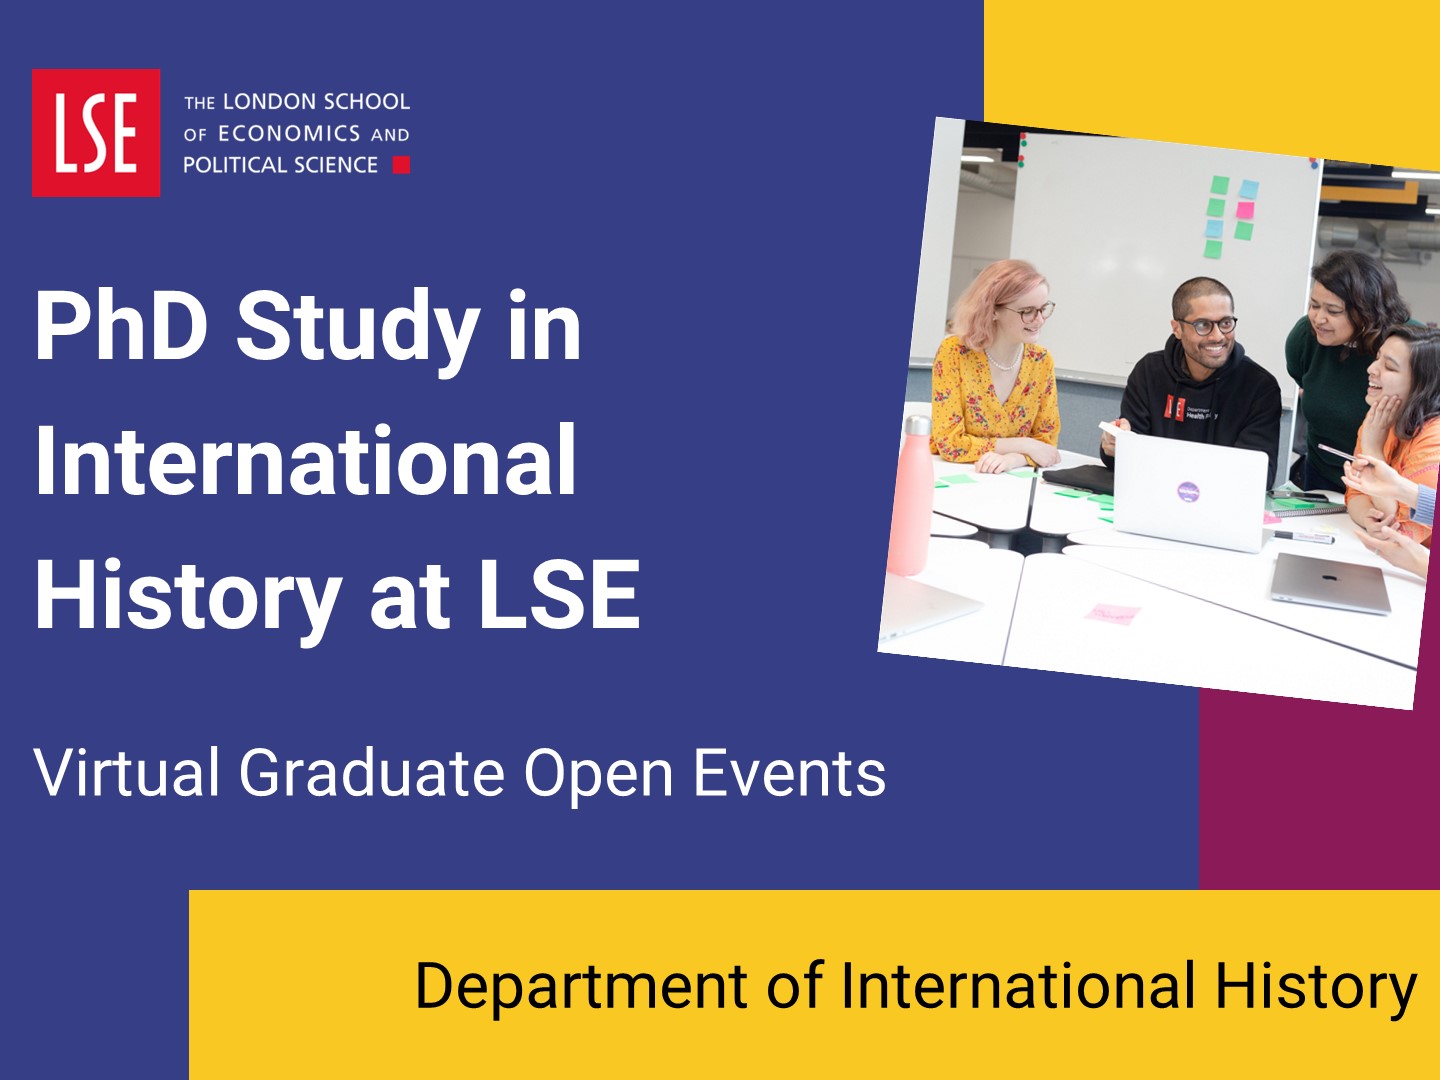 An introduction to PhD study in International History at LSE